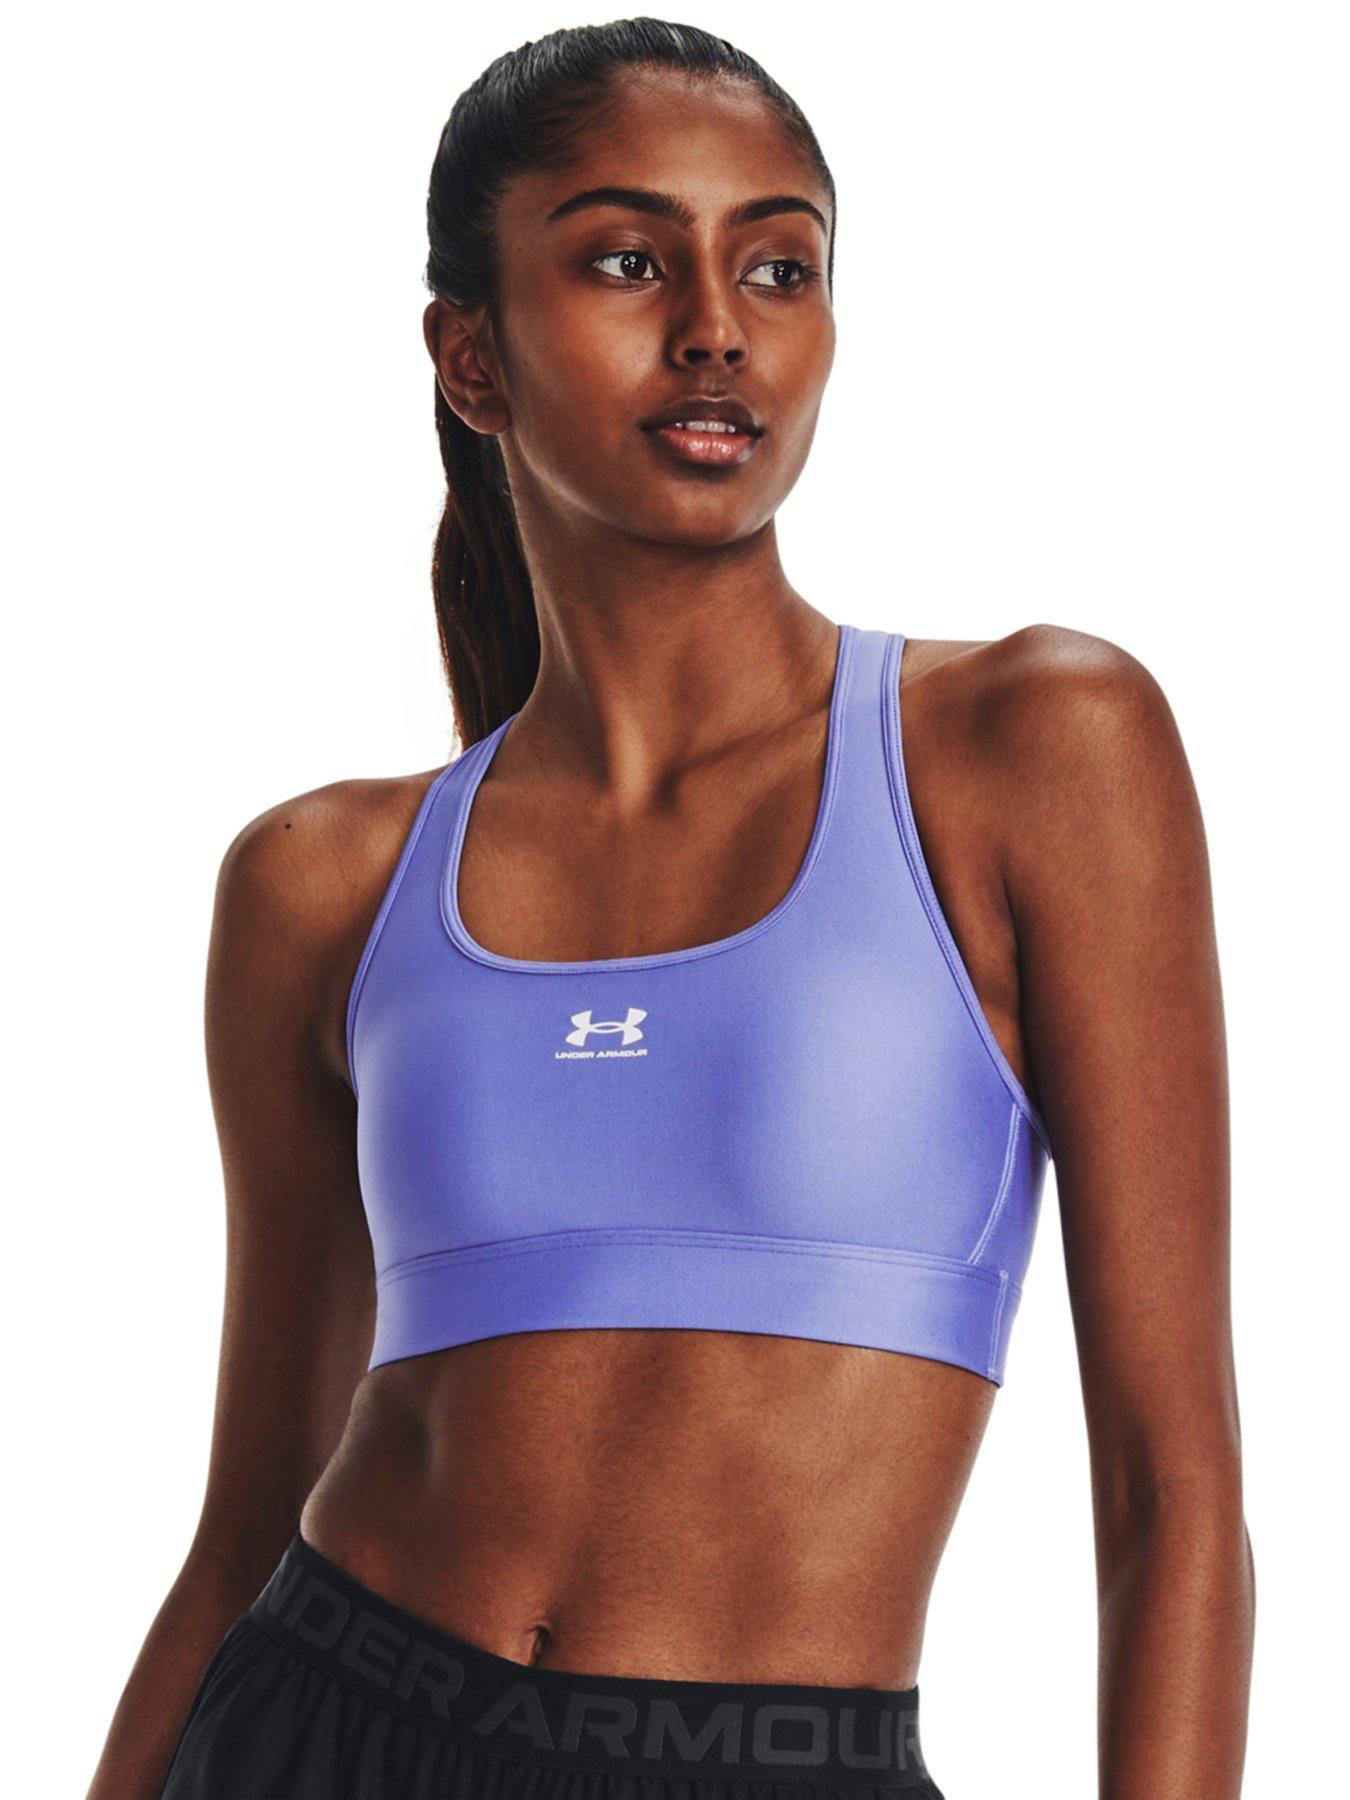 Extra 25% Off for Members: 100s of Styles Added $0 - $25 Under $70 Sports  Bras.